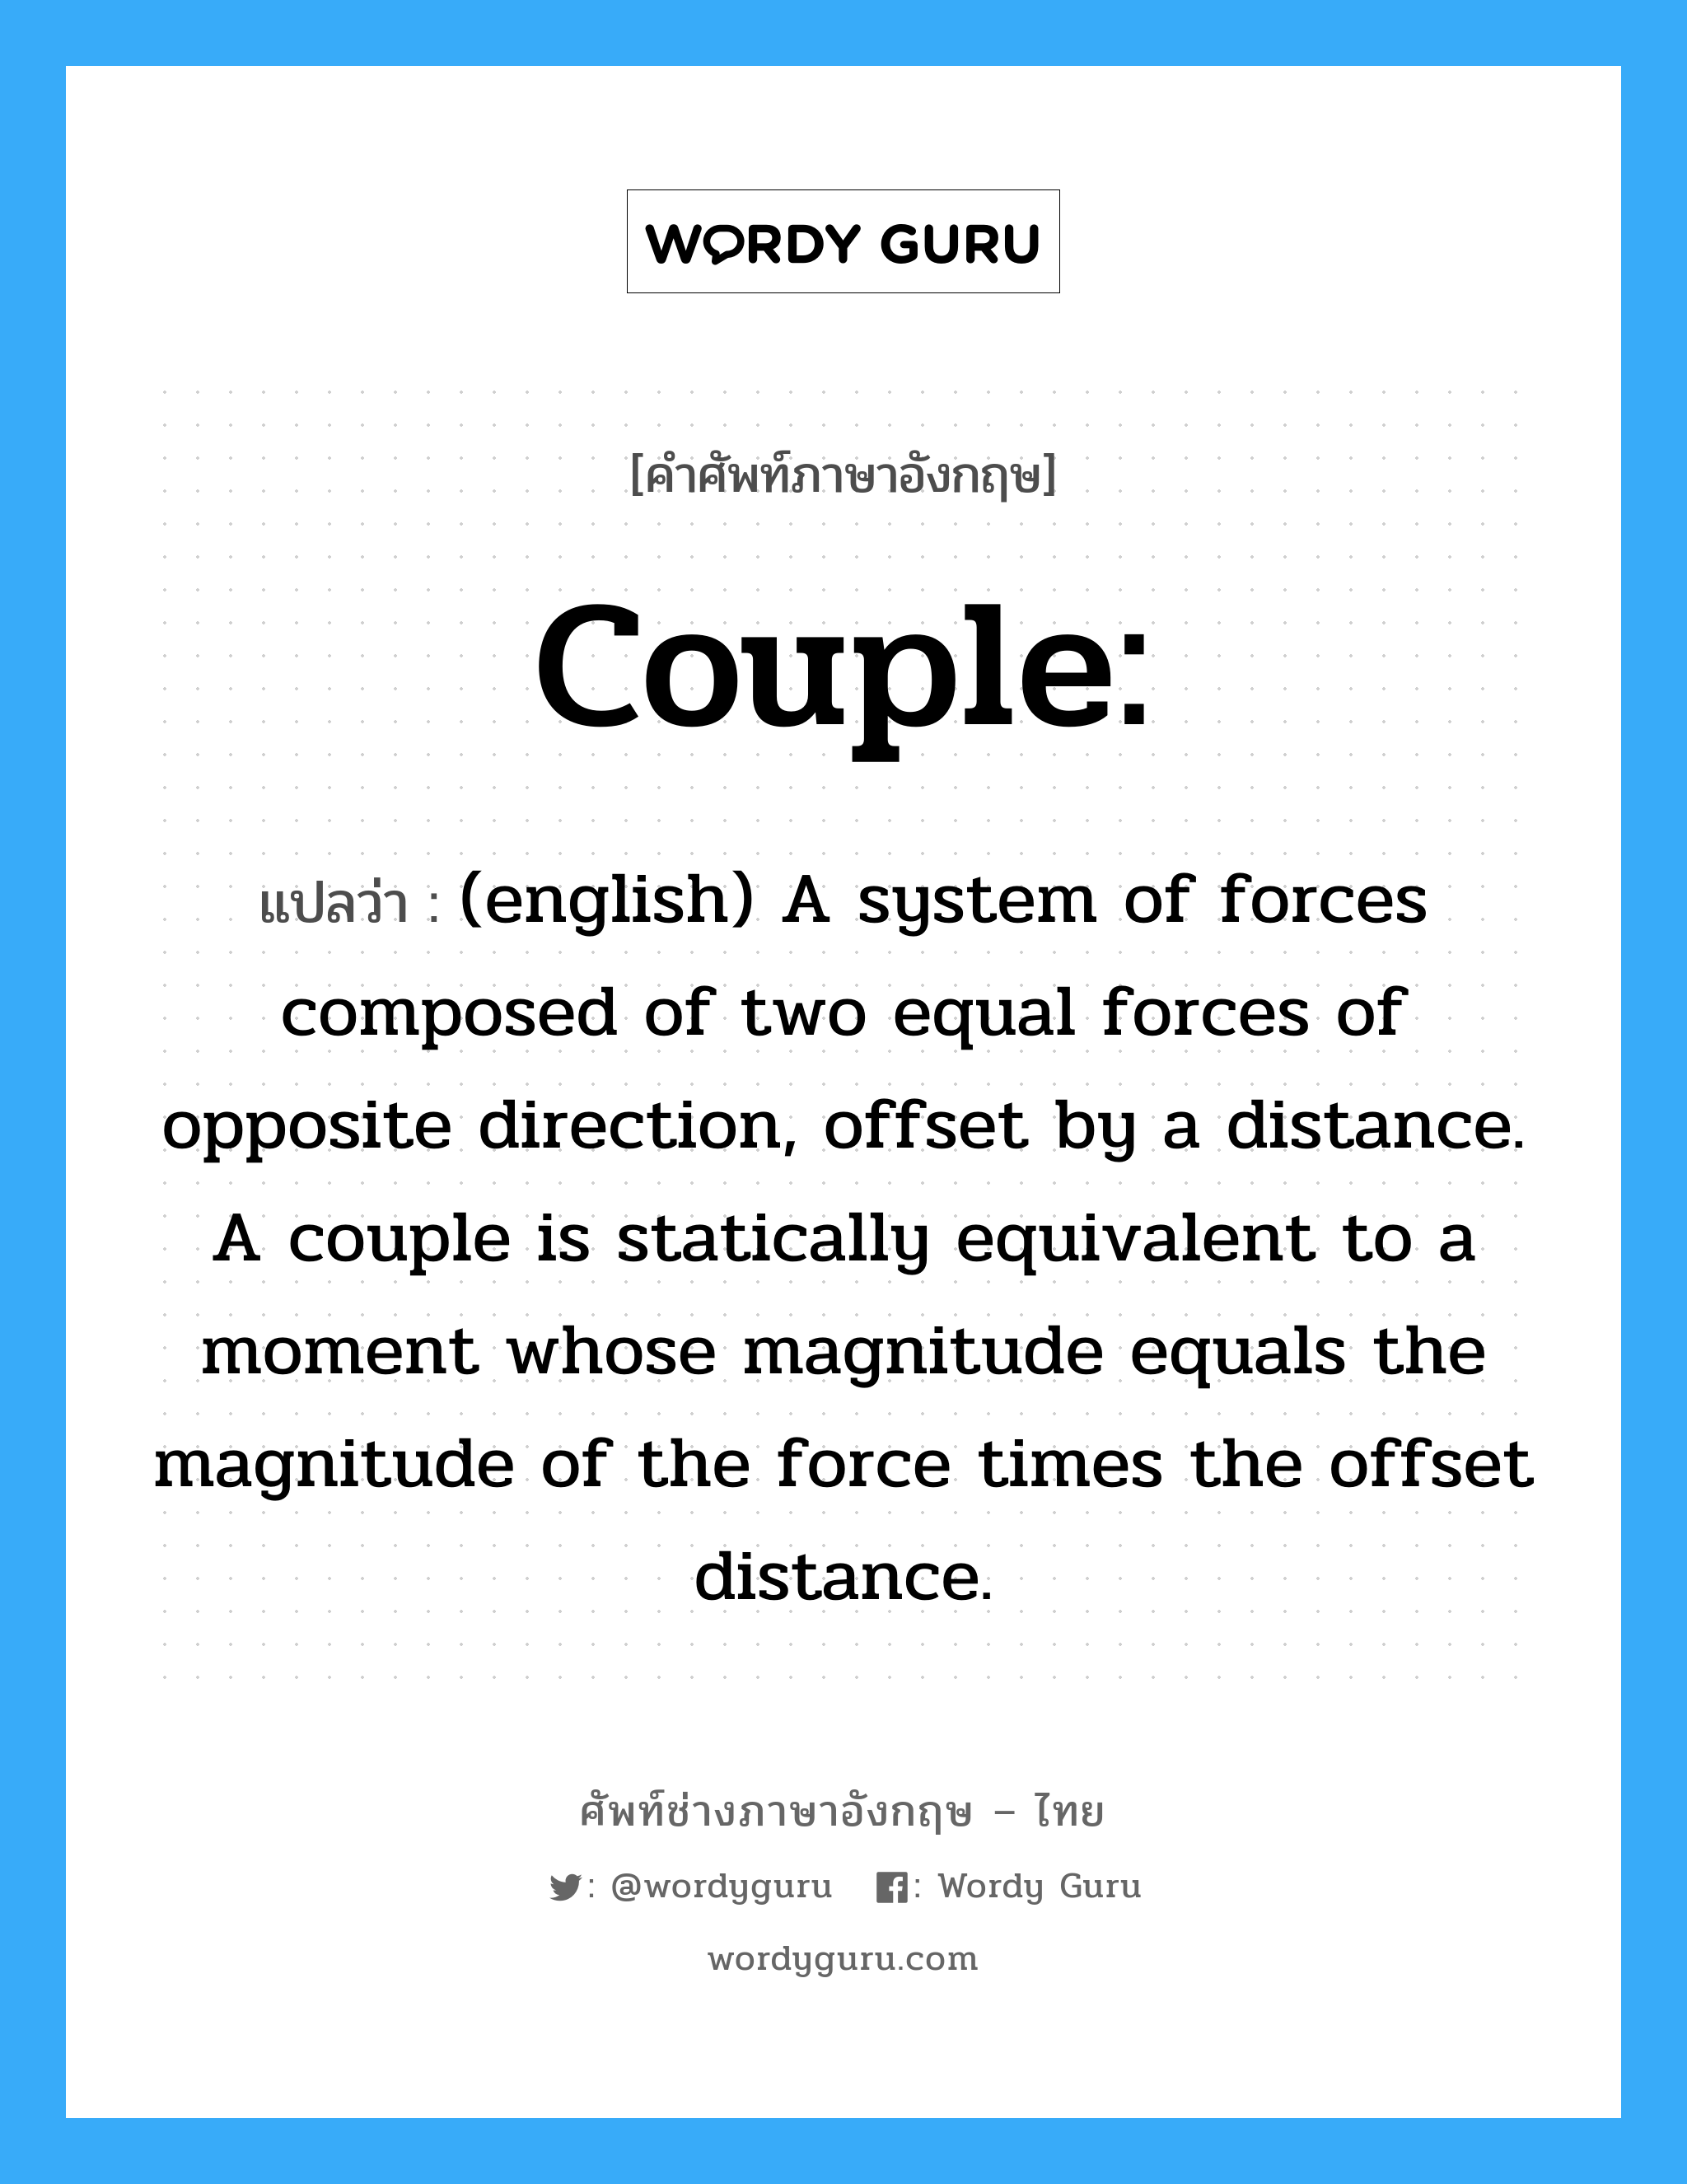 Couple: แปลว่า?, คำศัพท์ช่างภาษาอังกฤษ - ไทย Couple: คำศัพท์ภาษาอังกฤษ Couple: แปลว่า (english) A system of forces composed of two equal forces of opposite direction, offset by a distance. A couple is statically equivalent to a moment whose magnitude equals the magnitude of the force times the offset distance.